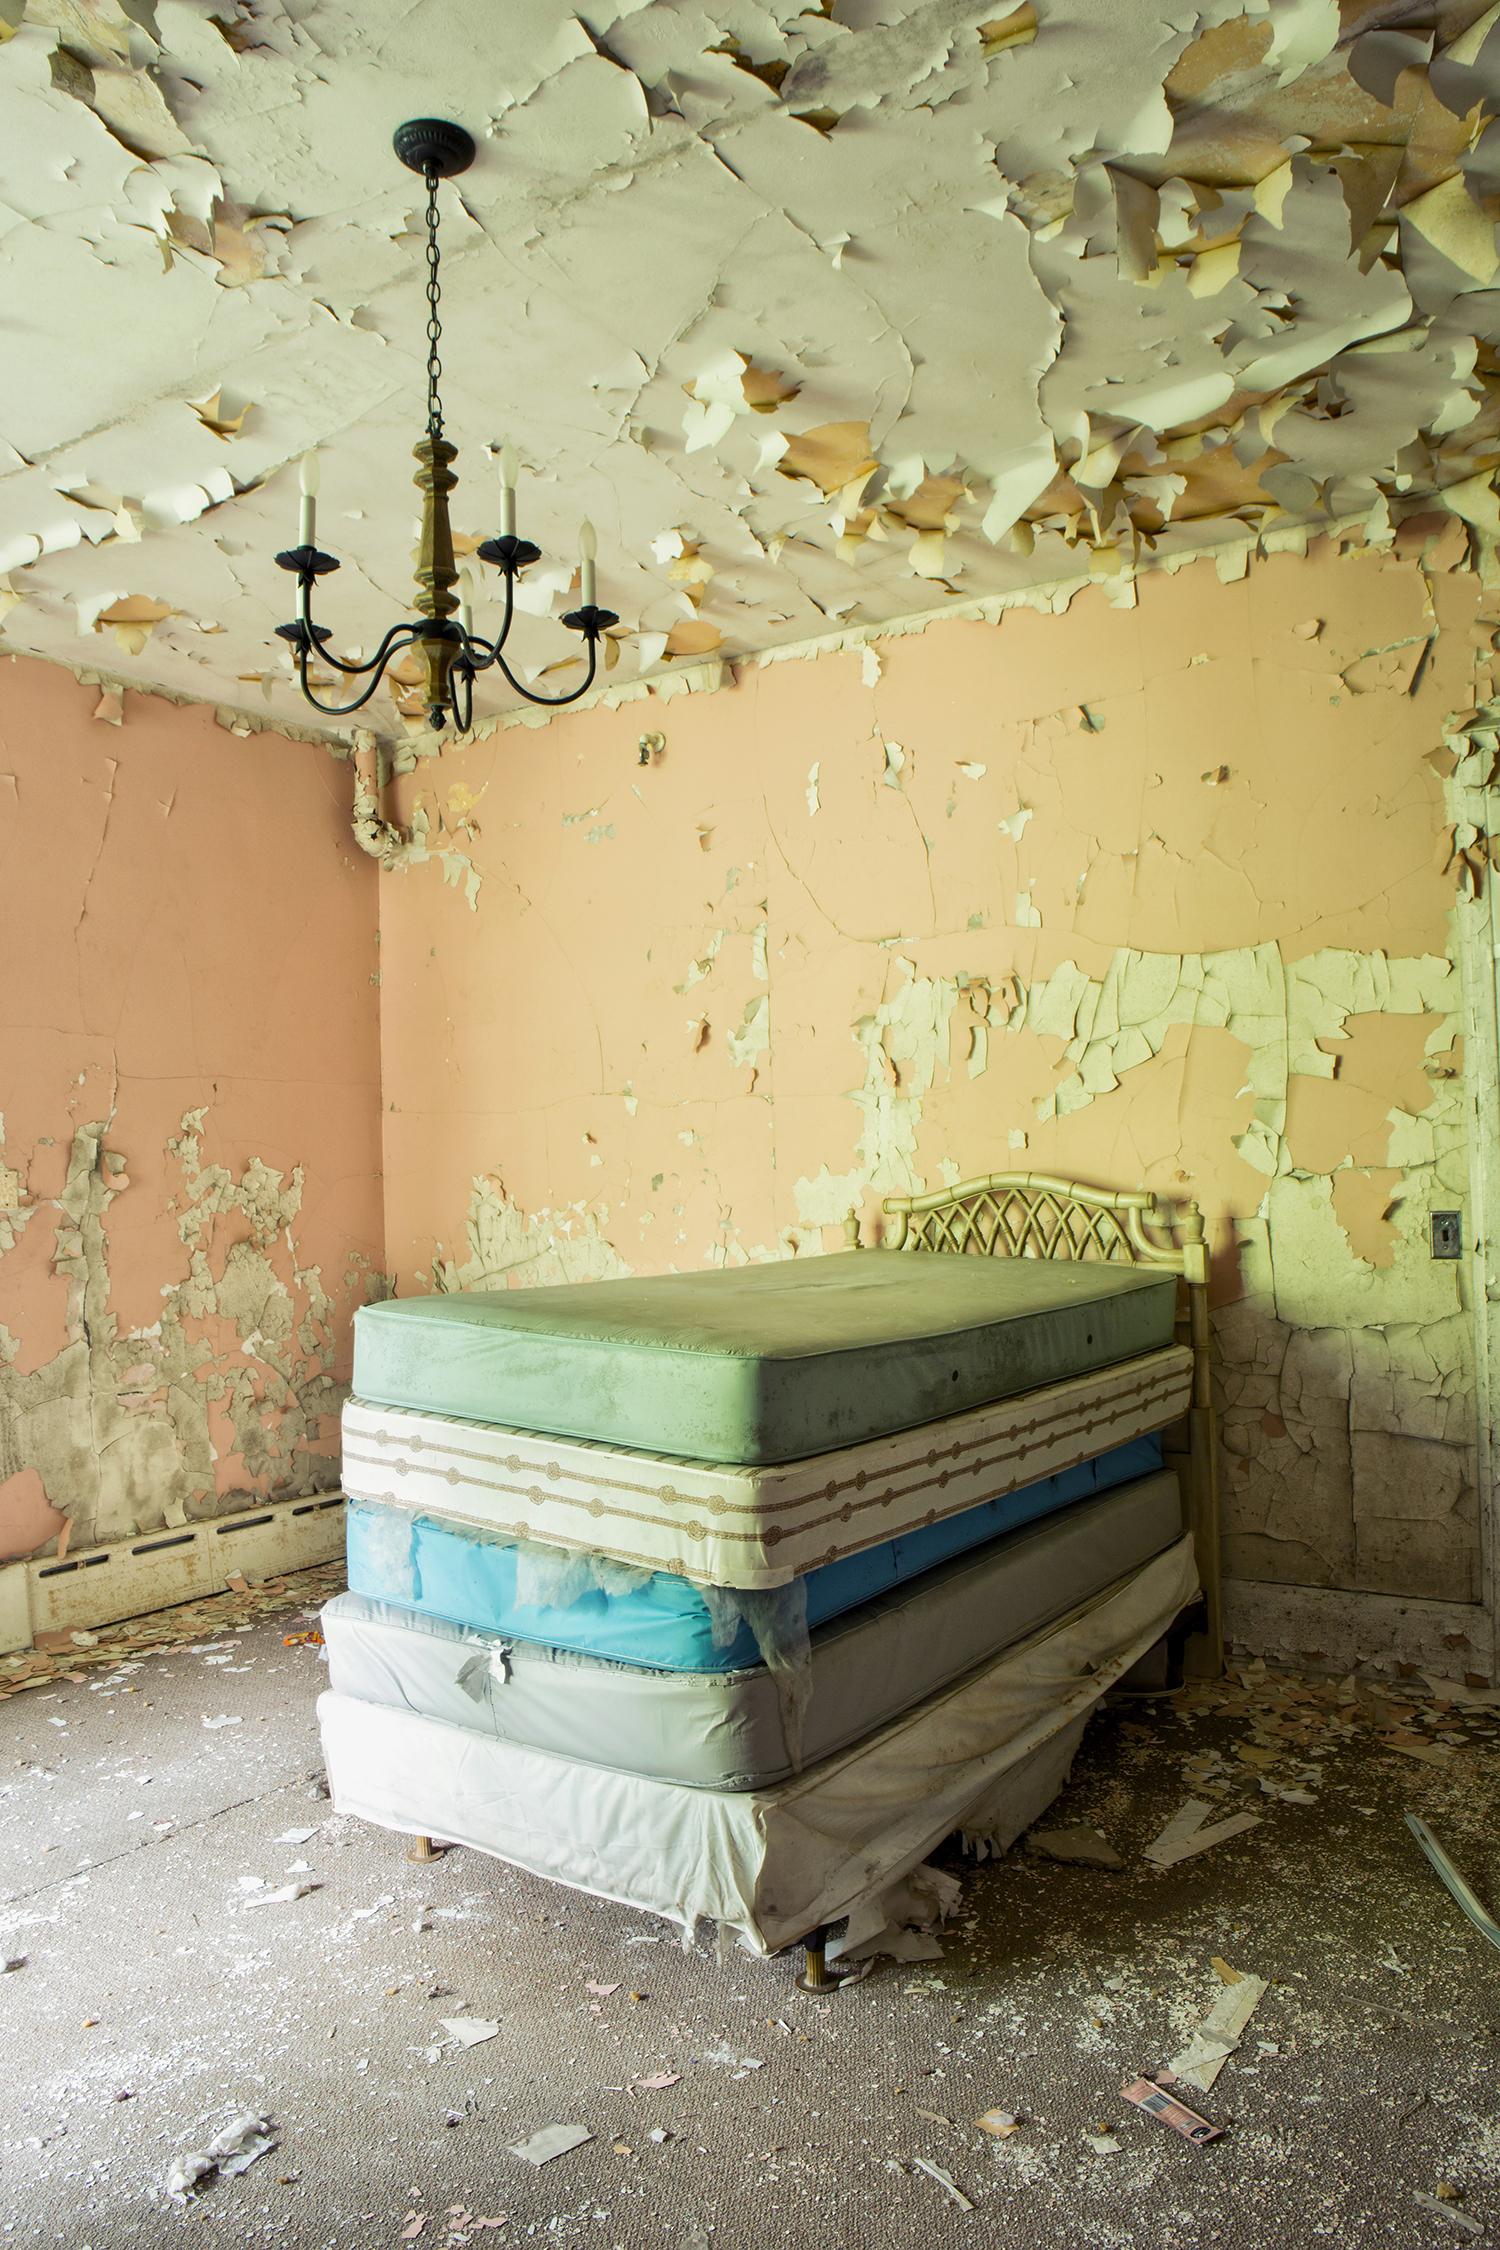 "Dream", interior, abandoned, bed, mattresses, peeling paint, peach, photography - Photograph by Rebecca Skinner